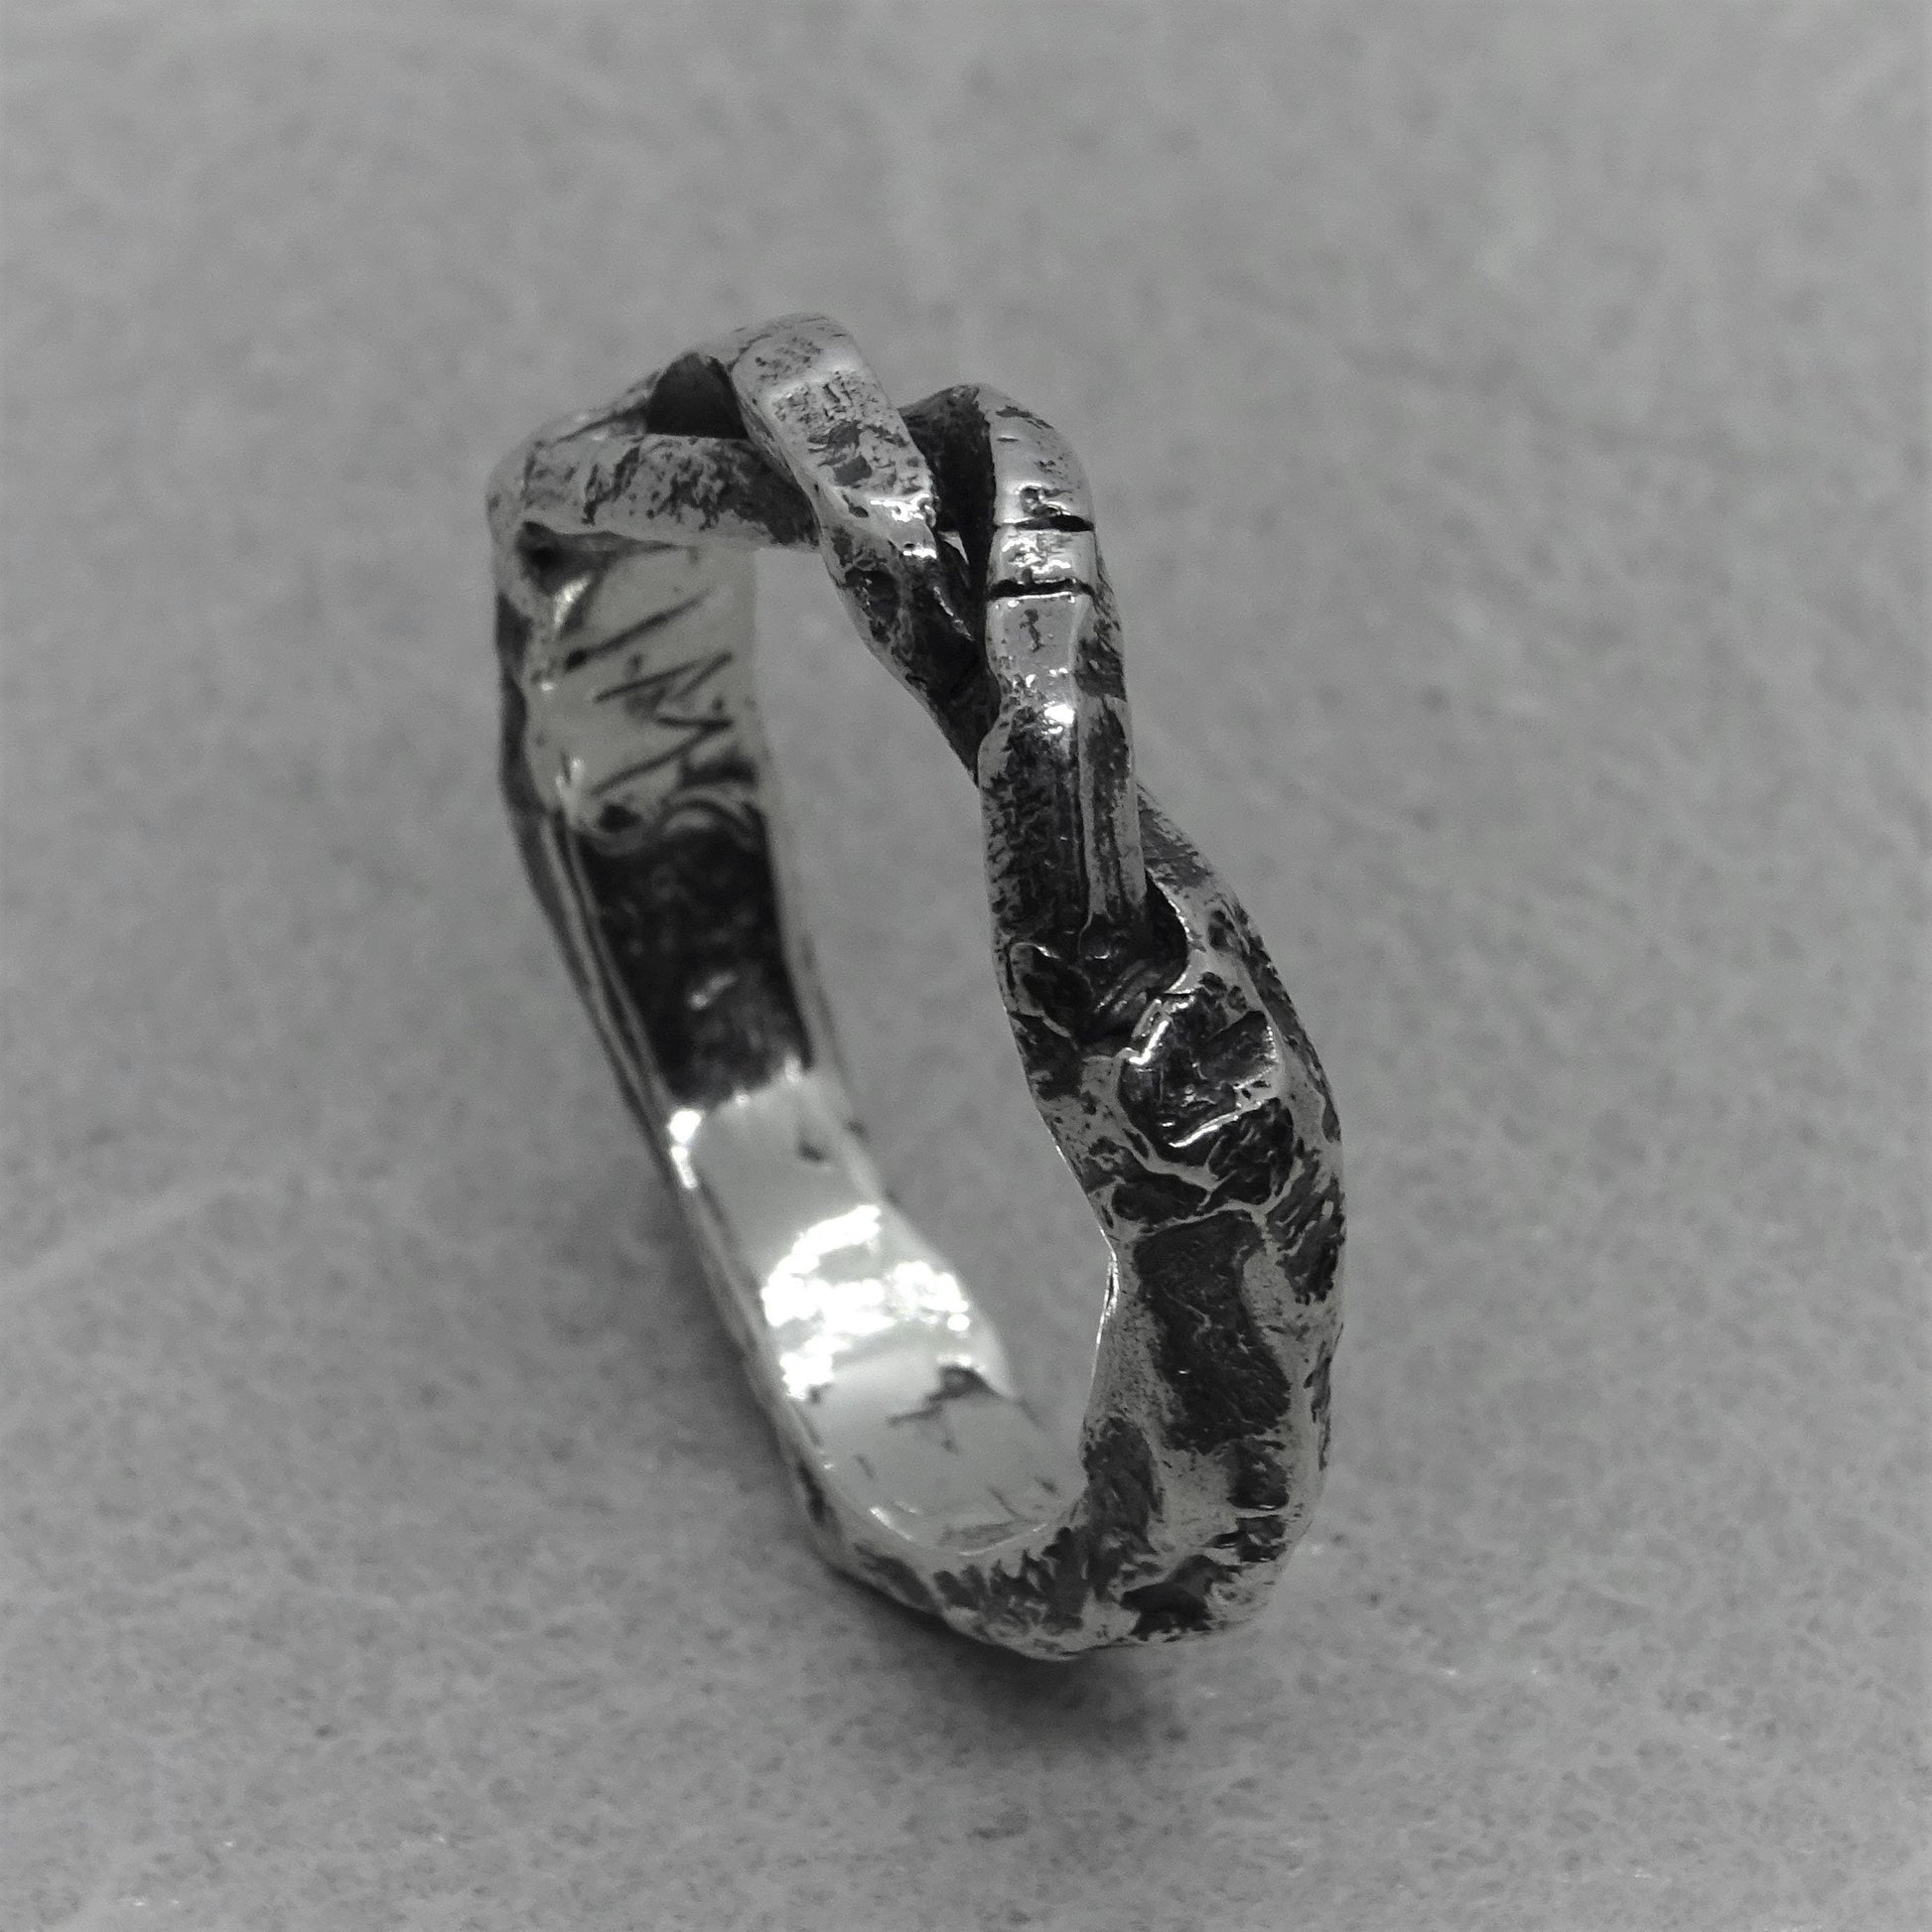 Twist ring- A thin twisted ring with an interesting stone texture Lightweight rings Project50g 